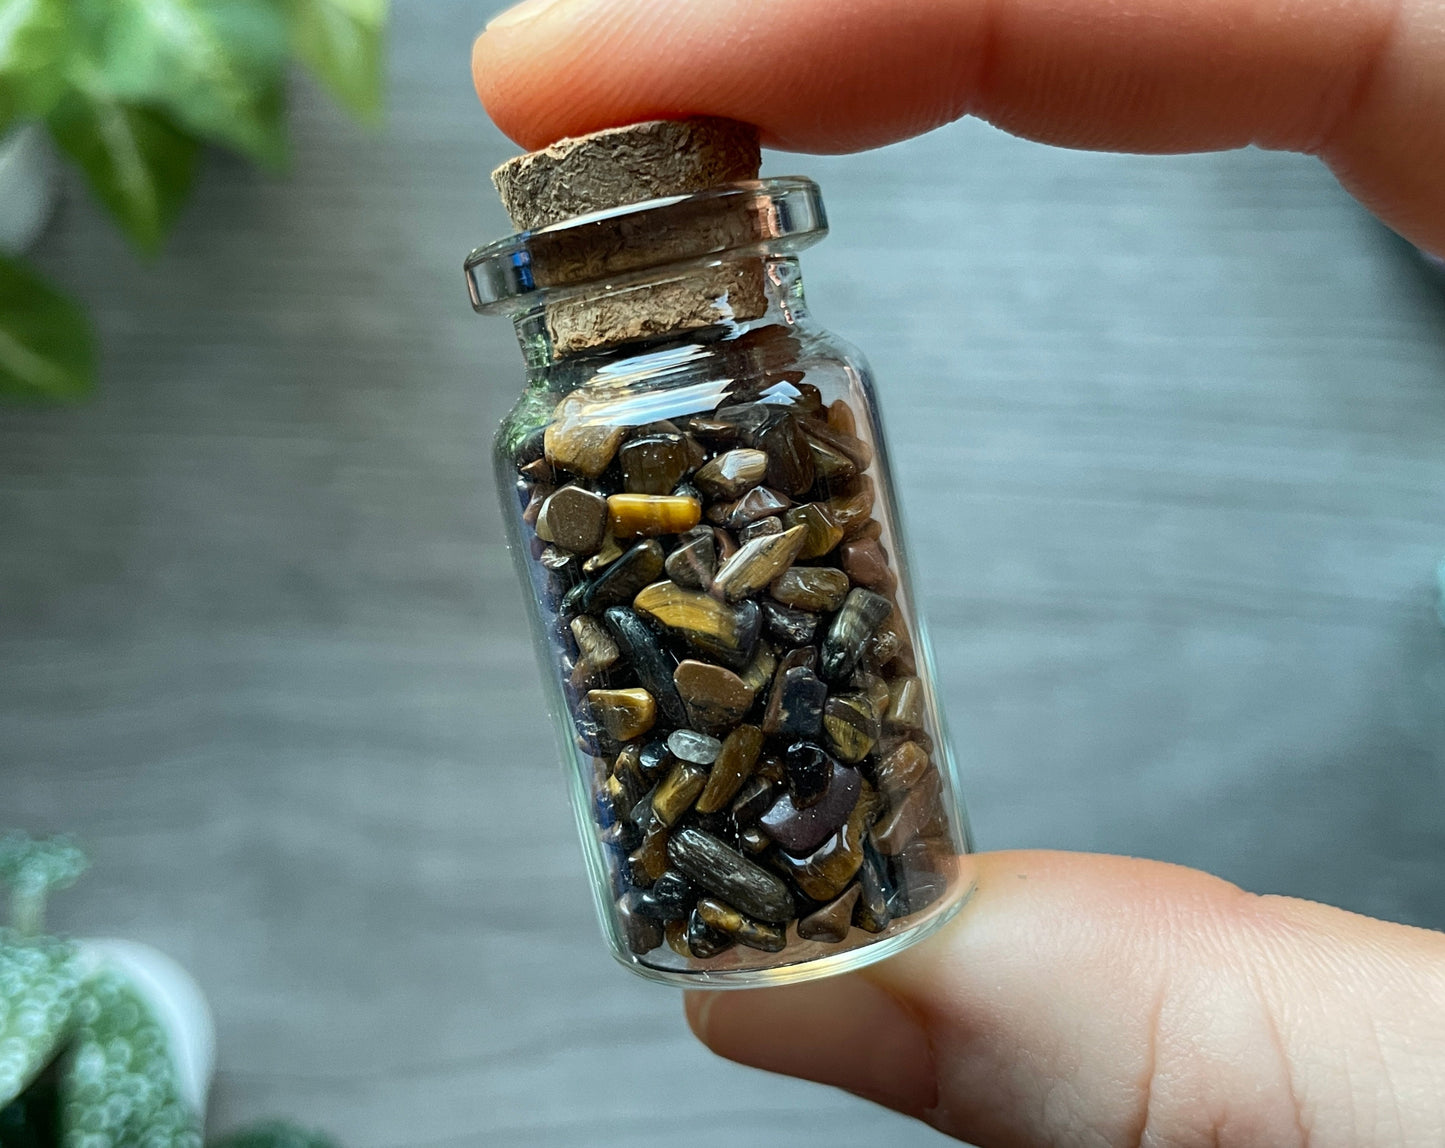 Pictured is a small glass vial with a cork stopper. Inside the jar are tiger's eye chips.